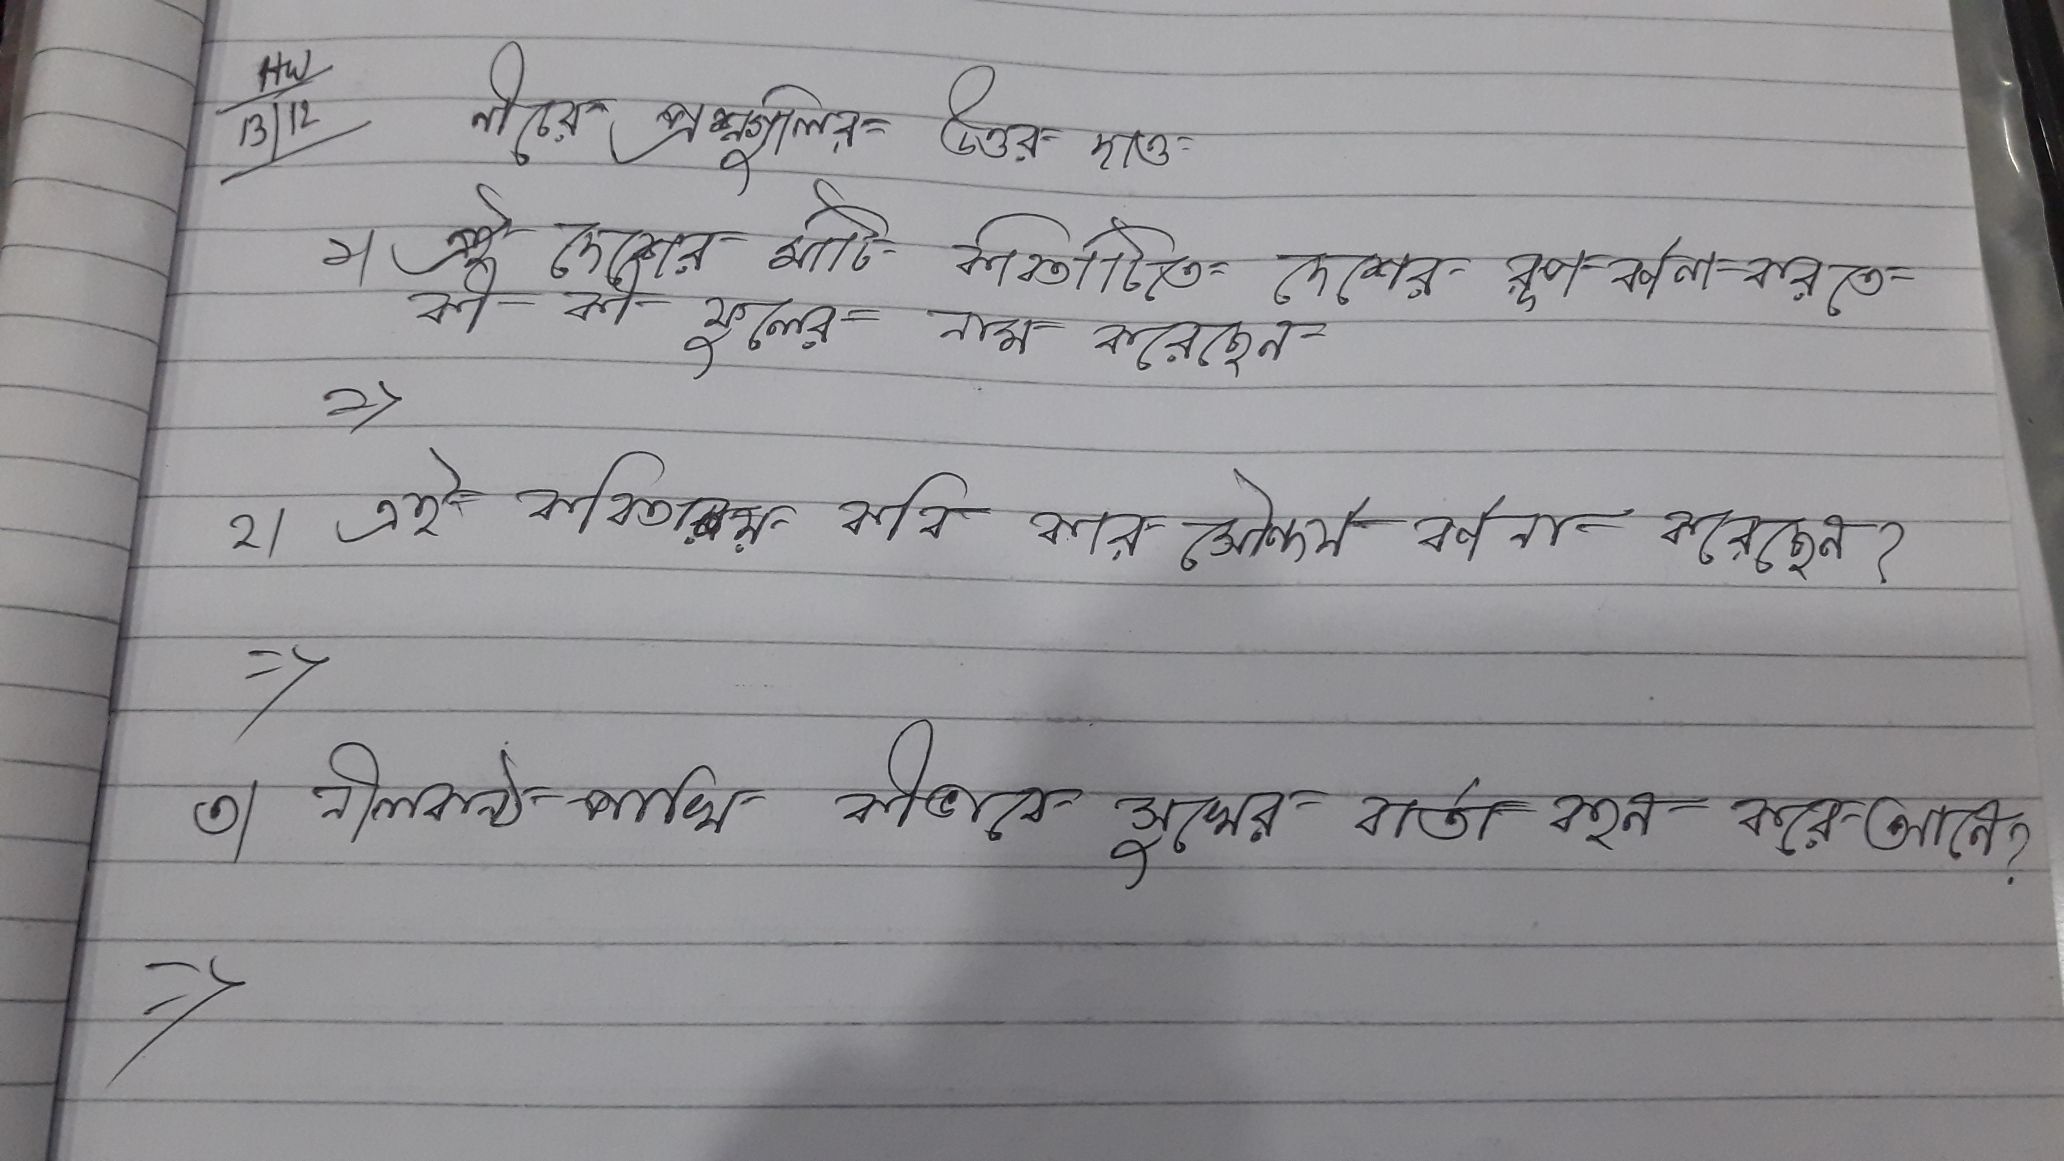 assignment meaning in bengali